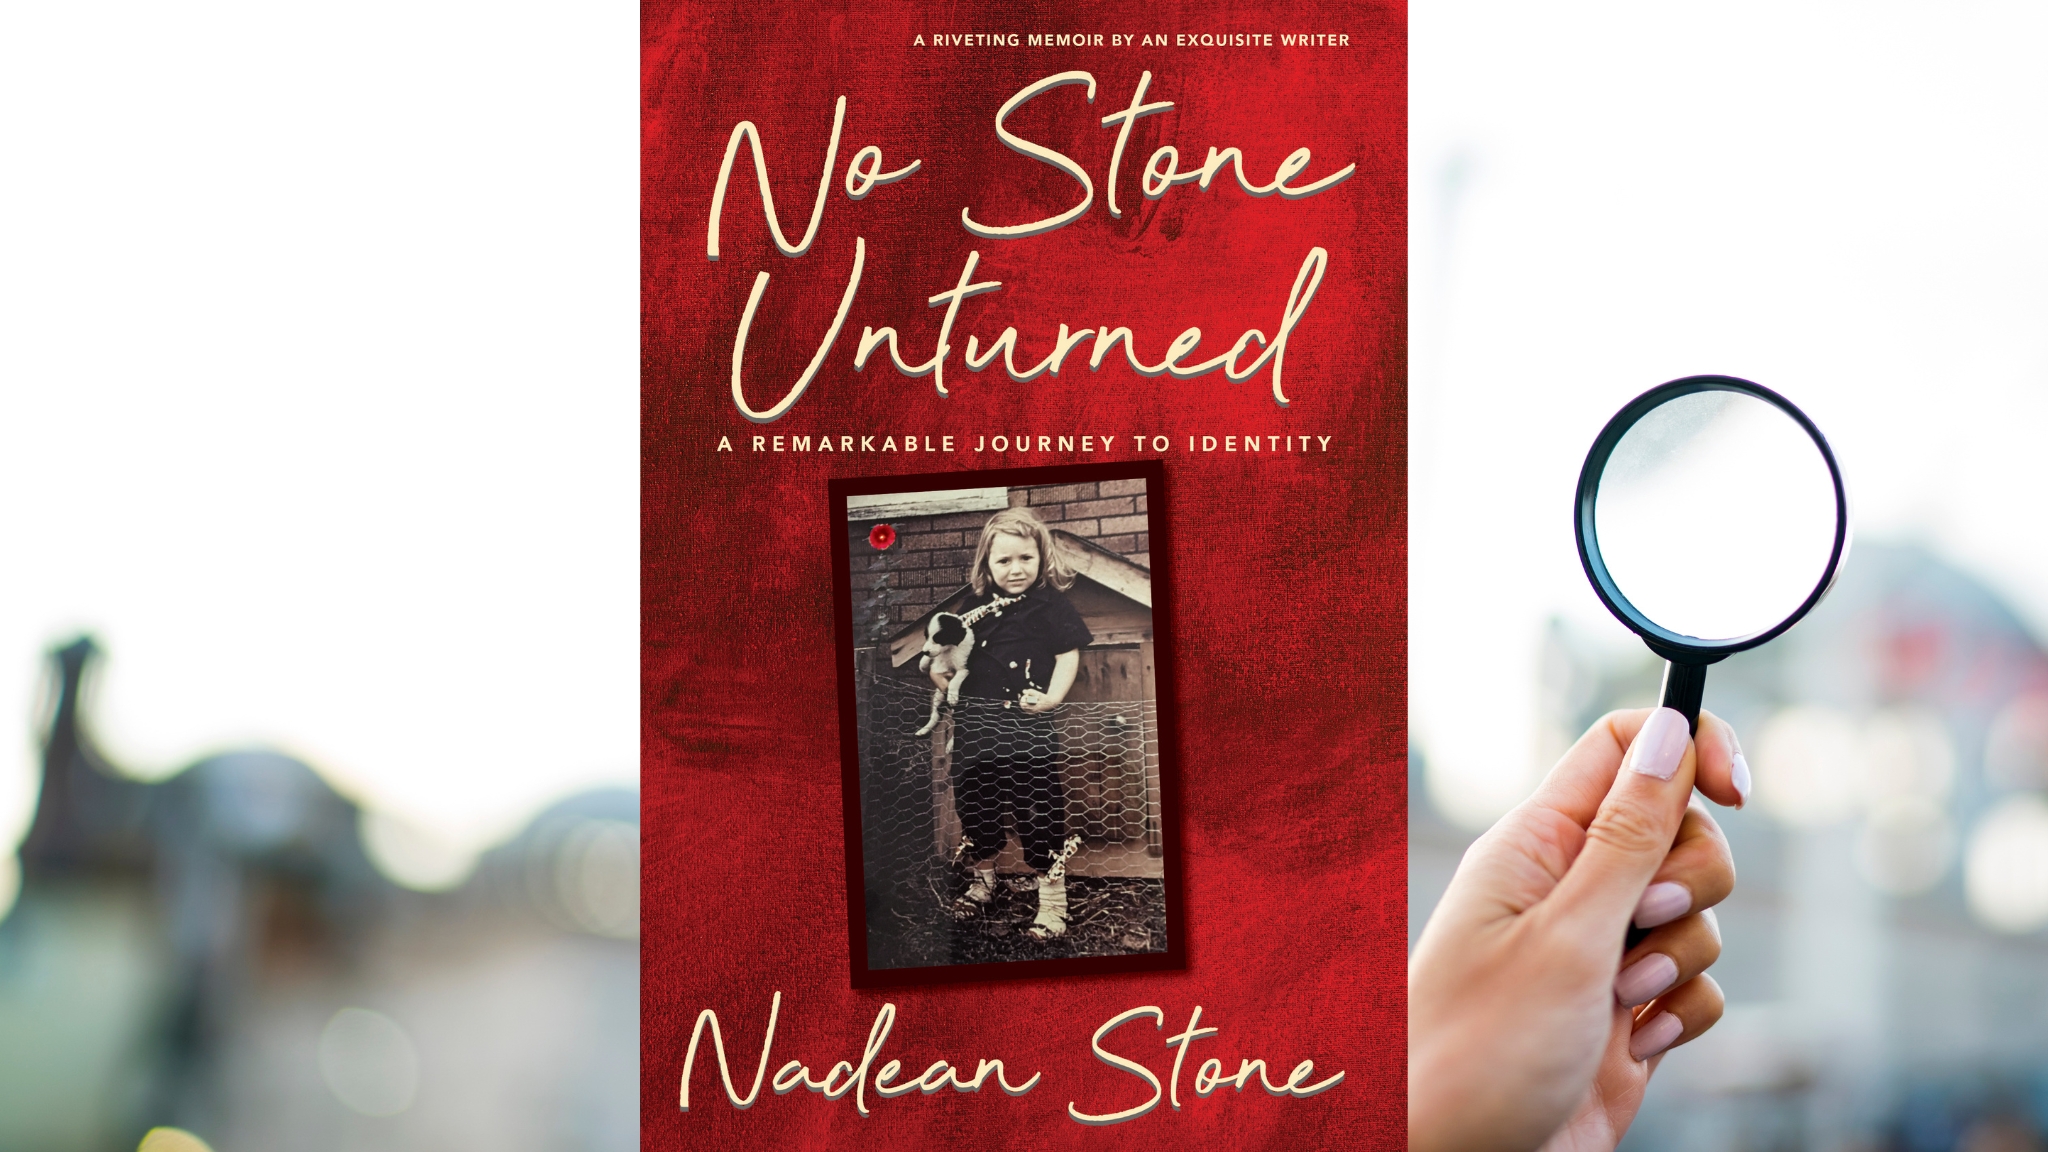 Booktrib review of the book No Stone Unturned